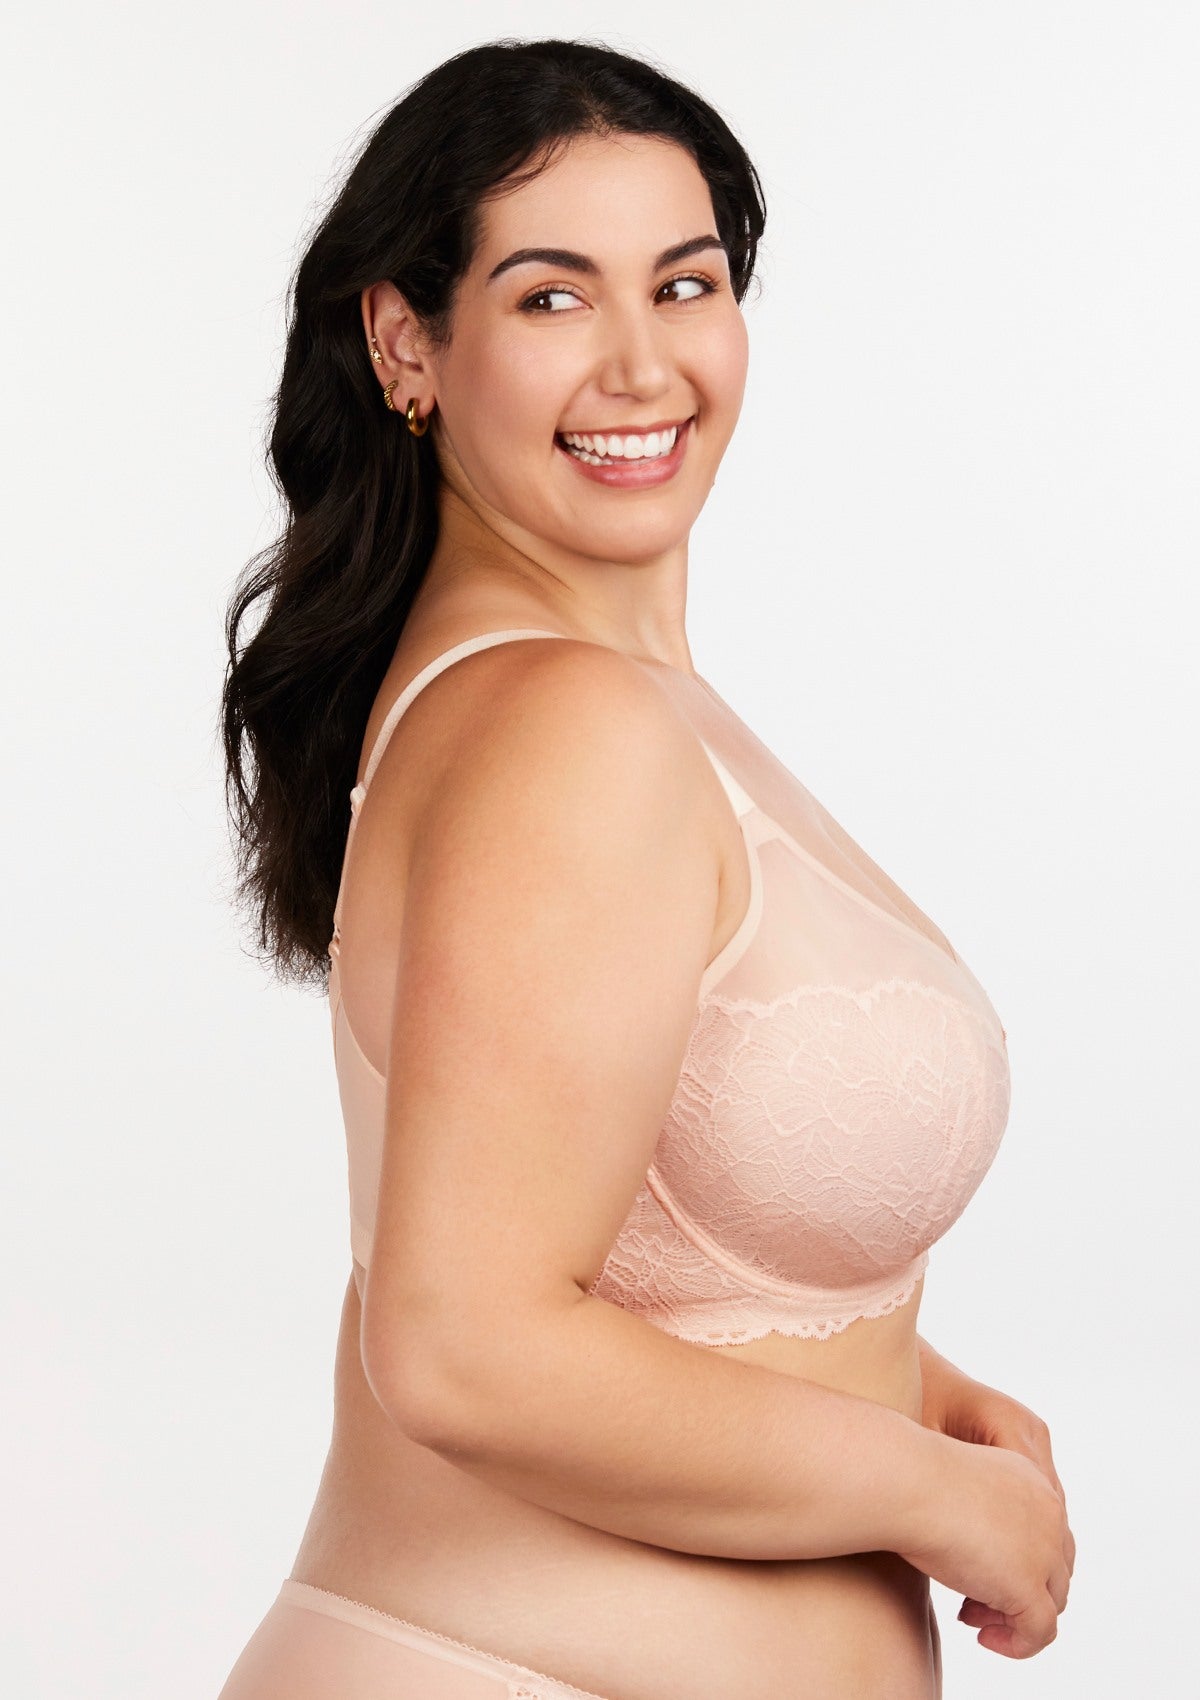 HSIA Blossom Sheer Lace Bra: Comfortable Underwire Bra For Big Busts - Dusty Peach / 36 / C